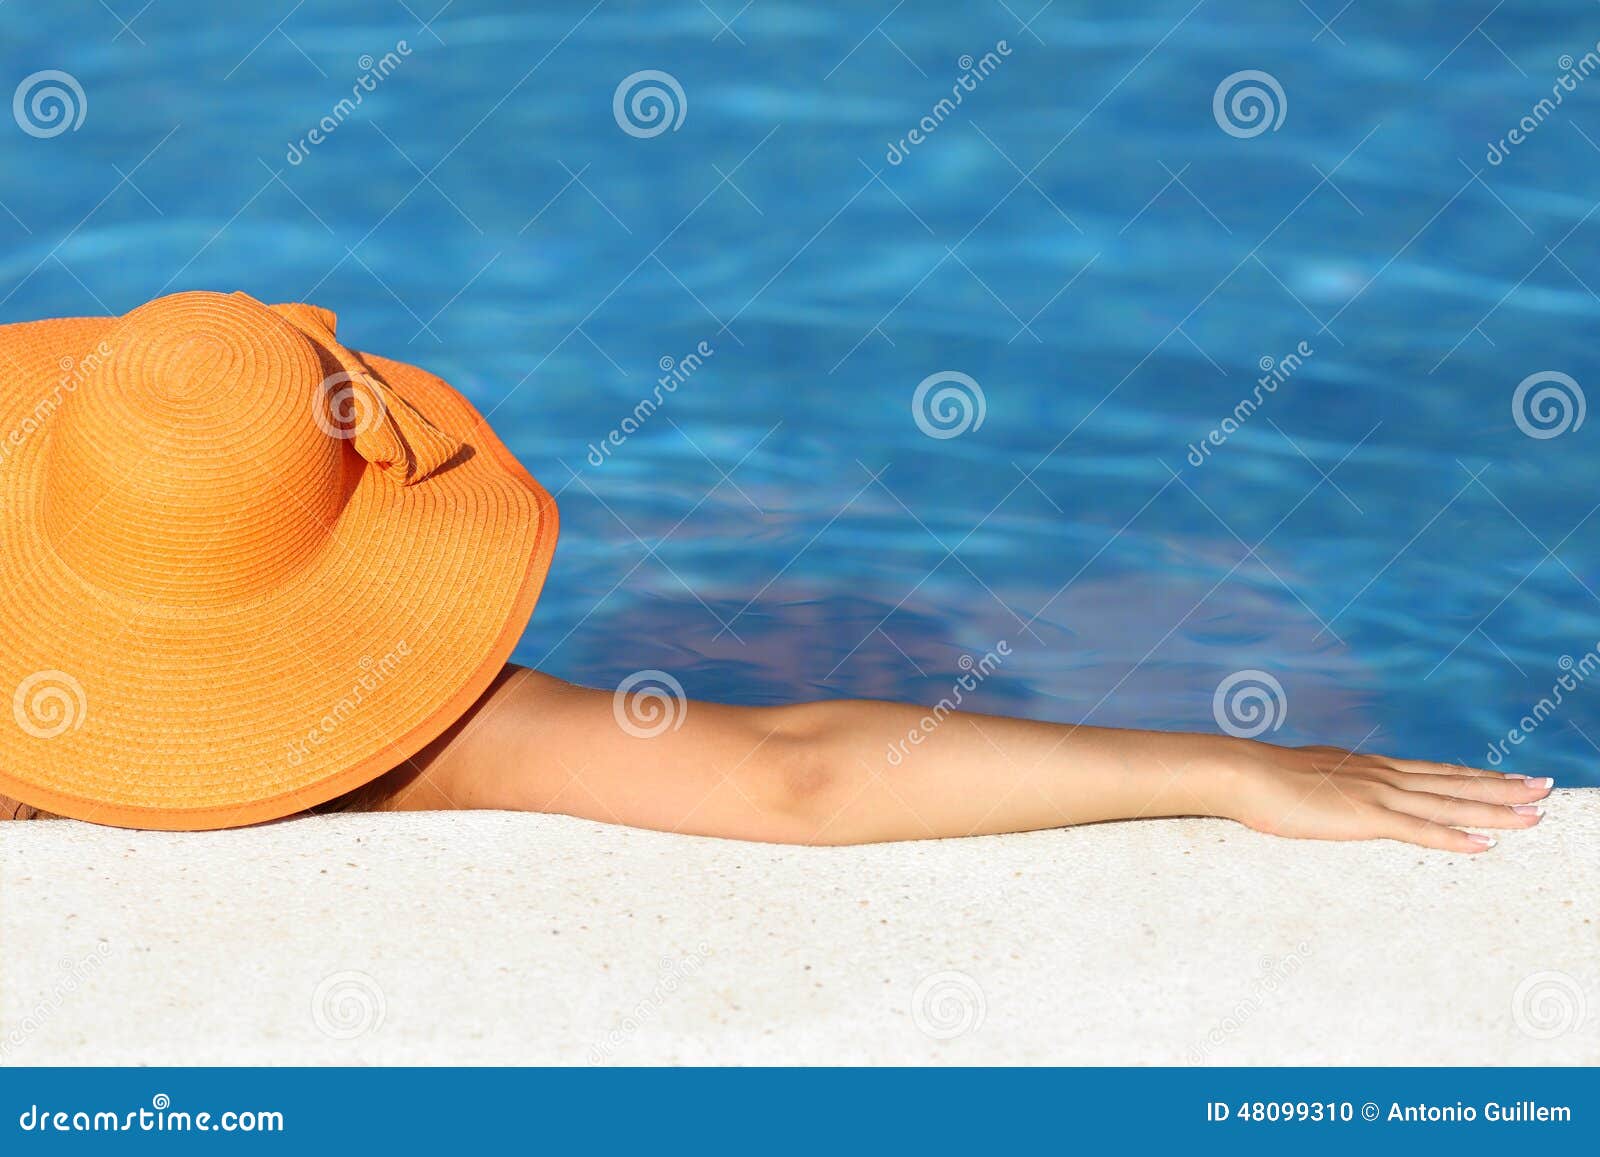 woman with picture hat bathing relaxed in a pool enjoying vacations